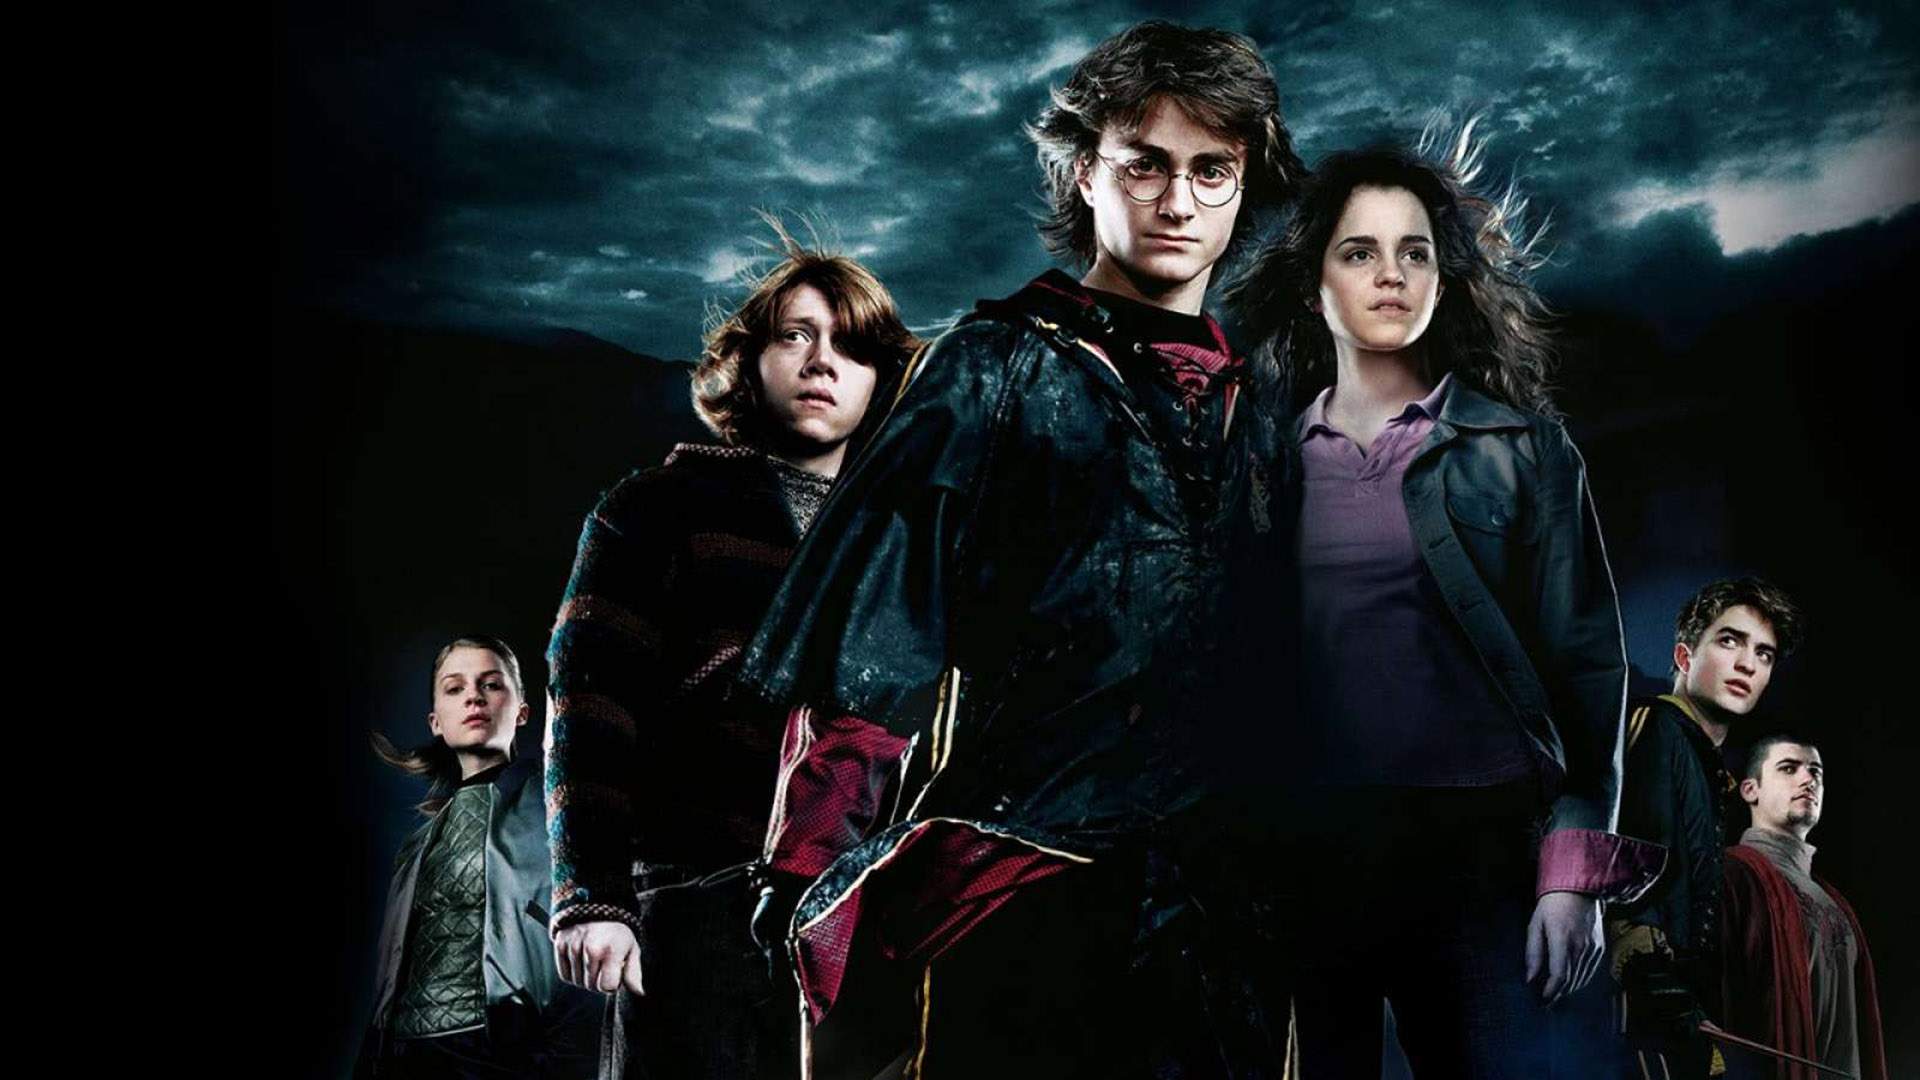 'Harry Potter and the Goblet of Fire' Live in Concert with the QSO